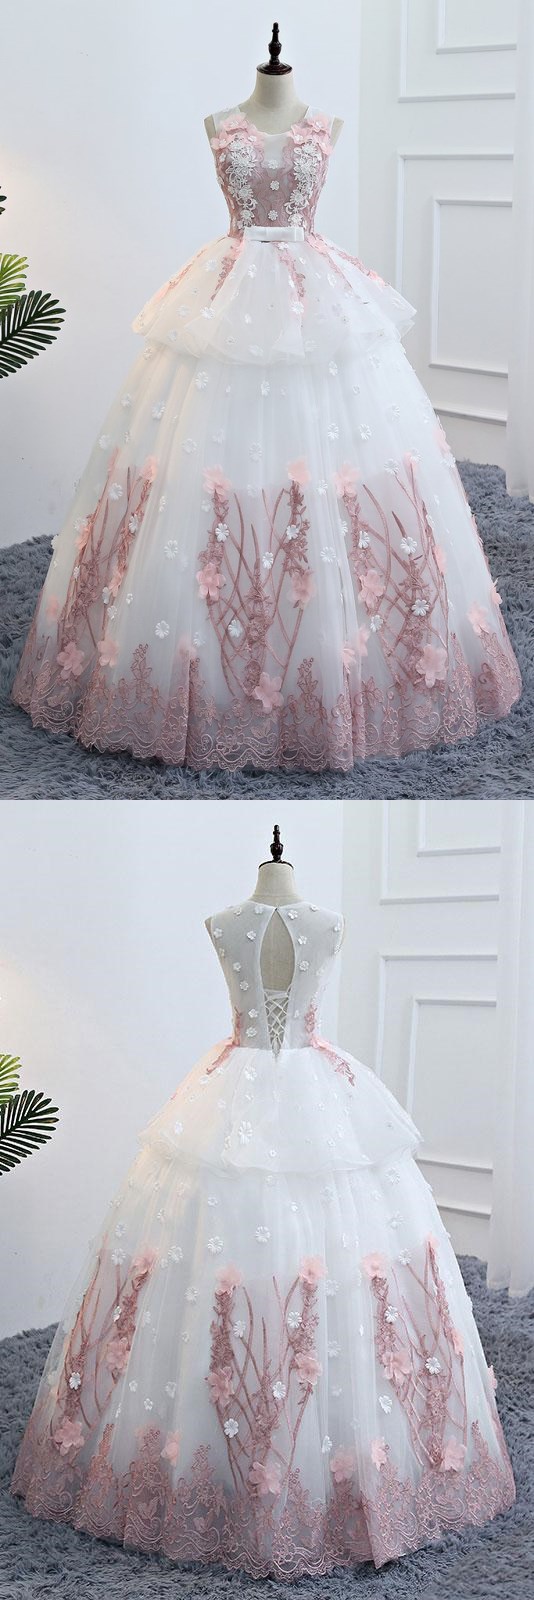 Cute White Round Neck Lace Applique Long Prom Gown, Evening Dress